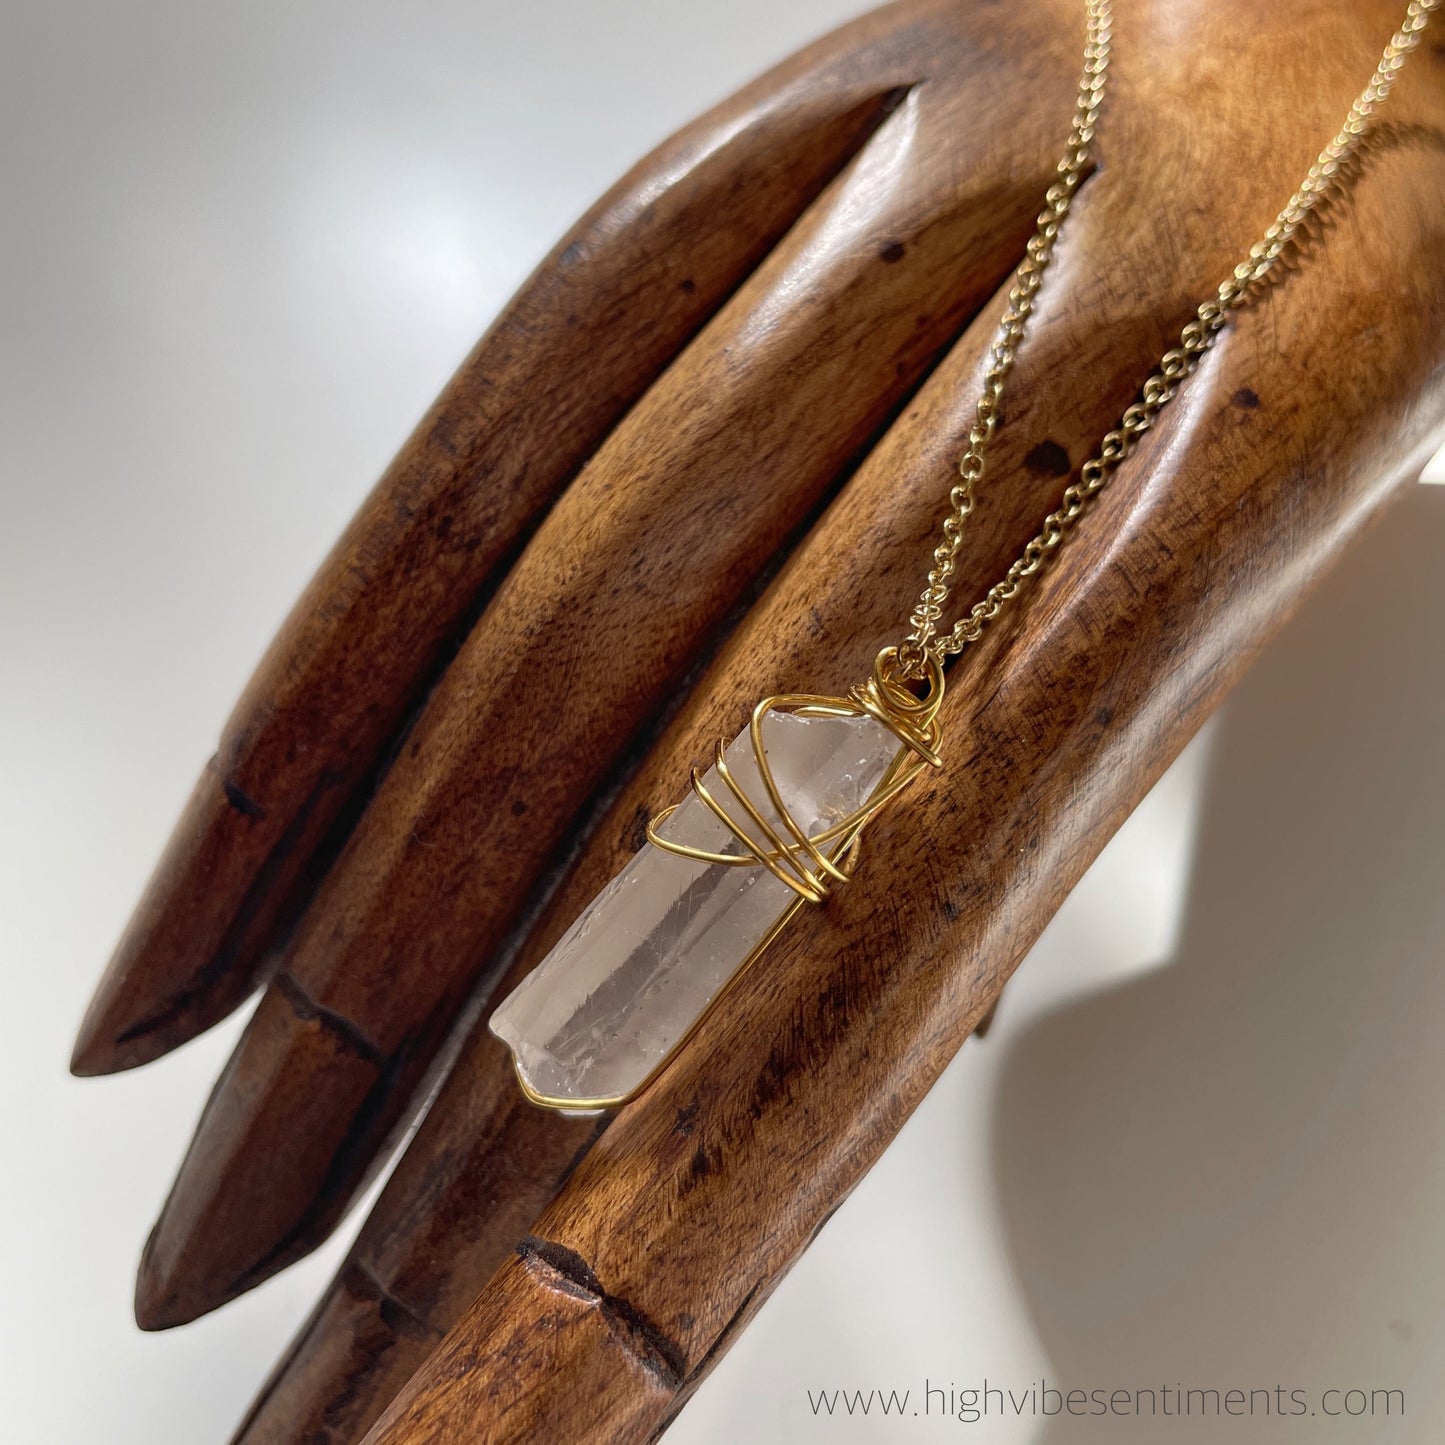 High Vibe Sentiments, Wire Wrapped Raw Quartz Necklace